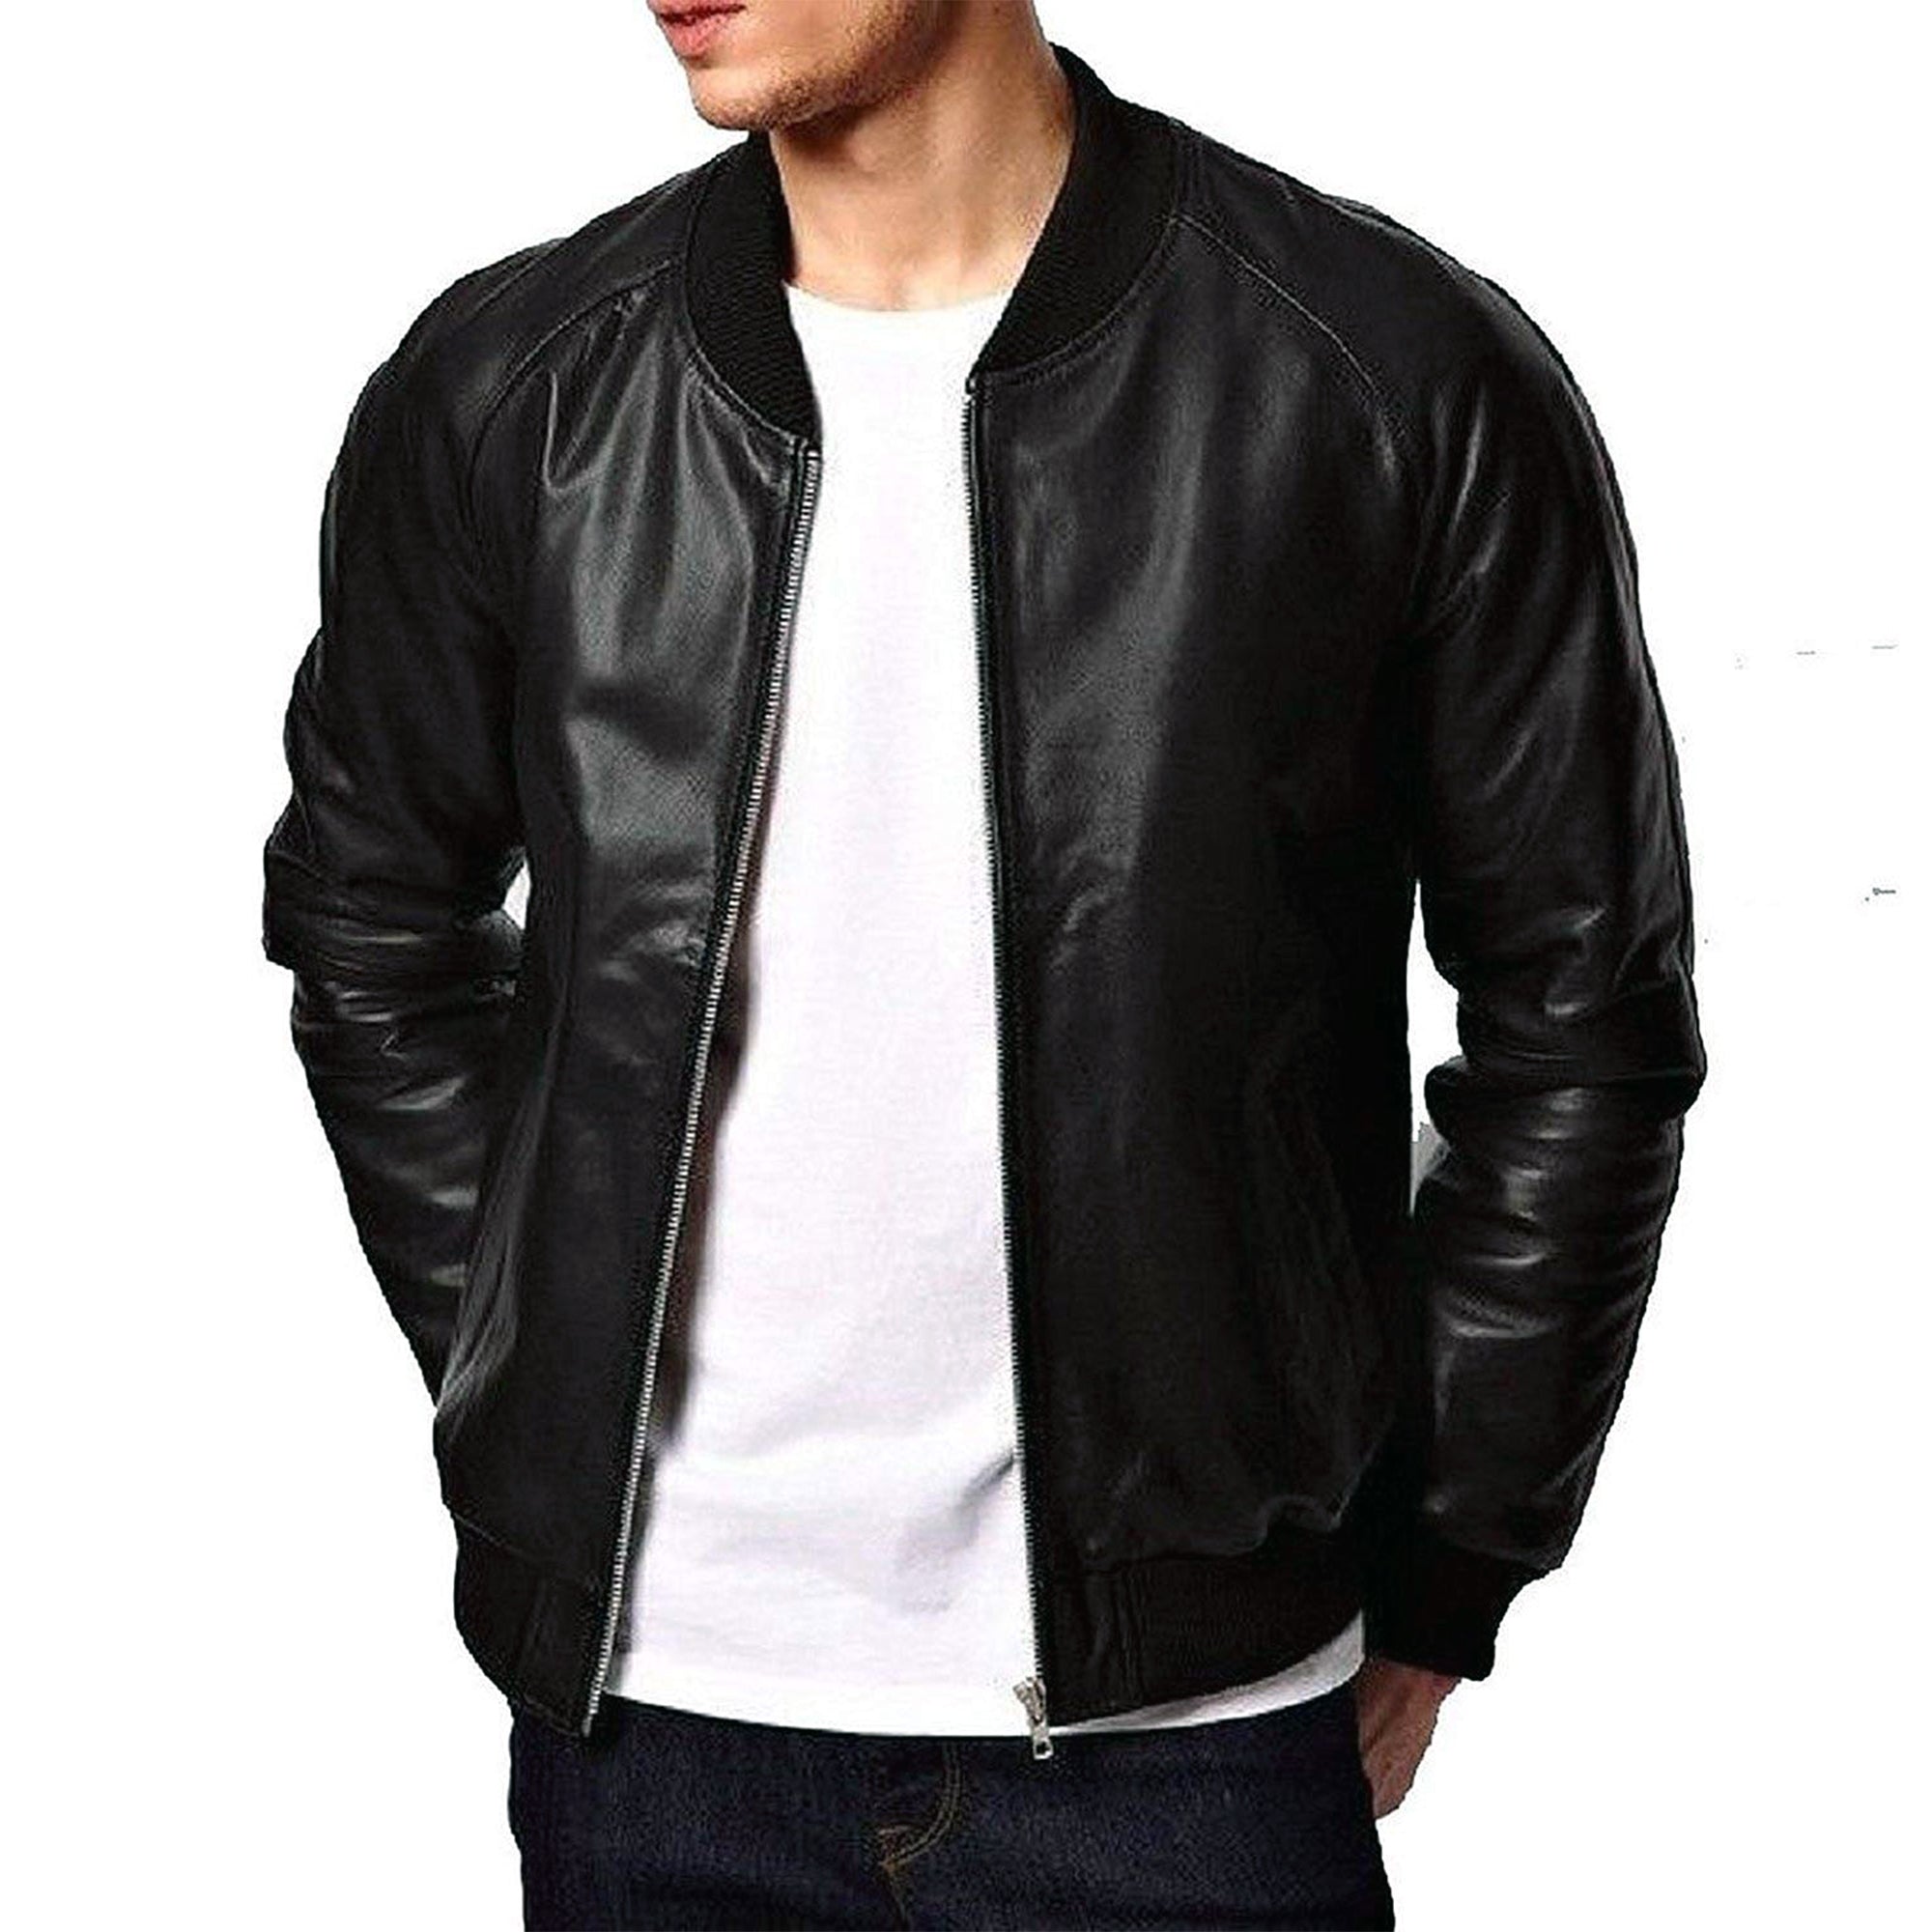 Upto 50% to 80% OFF on Bomber Jackets Online| The Tee Shop